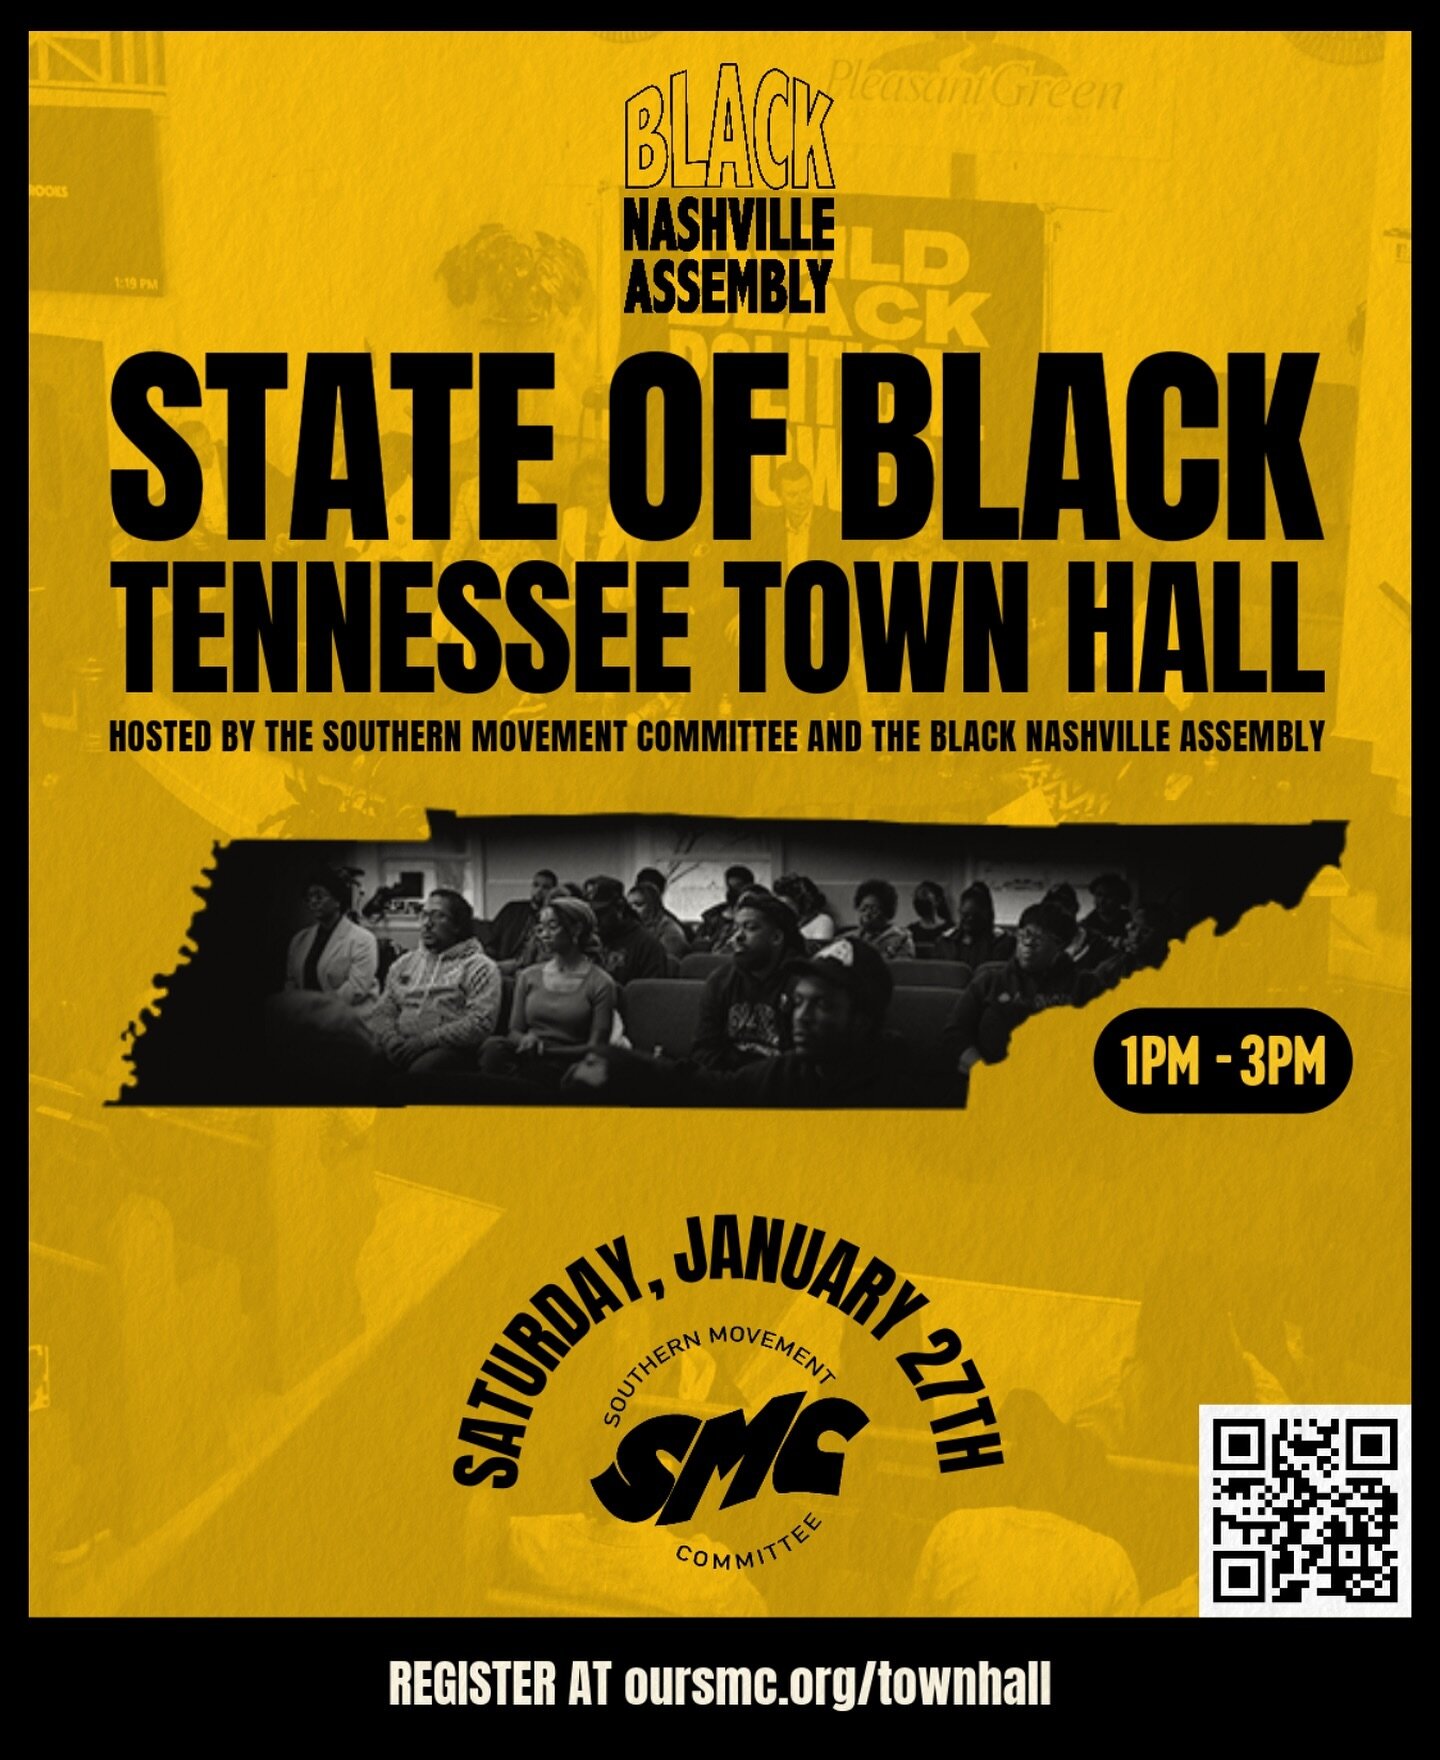 We going statewide this January. Start 2024 off right. RSVP at oursmc.org/townhall for the State of Black Tennessee. 

All Tennessee invited!